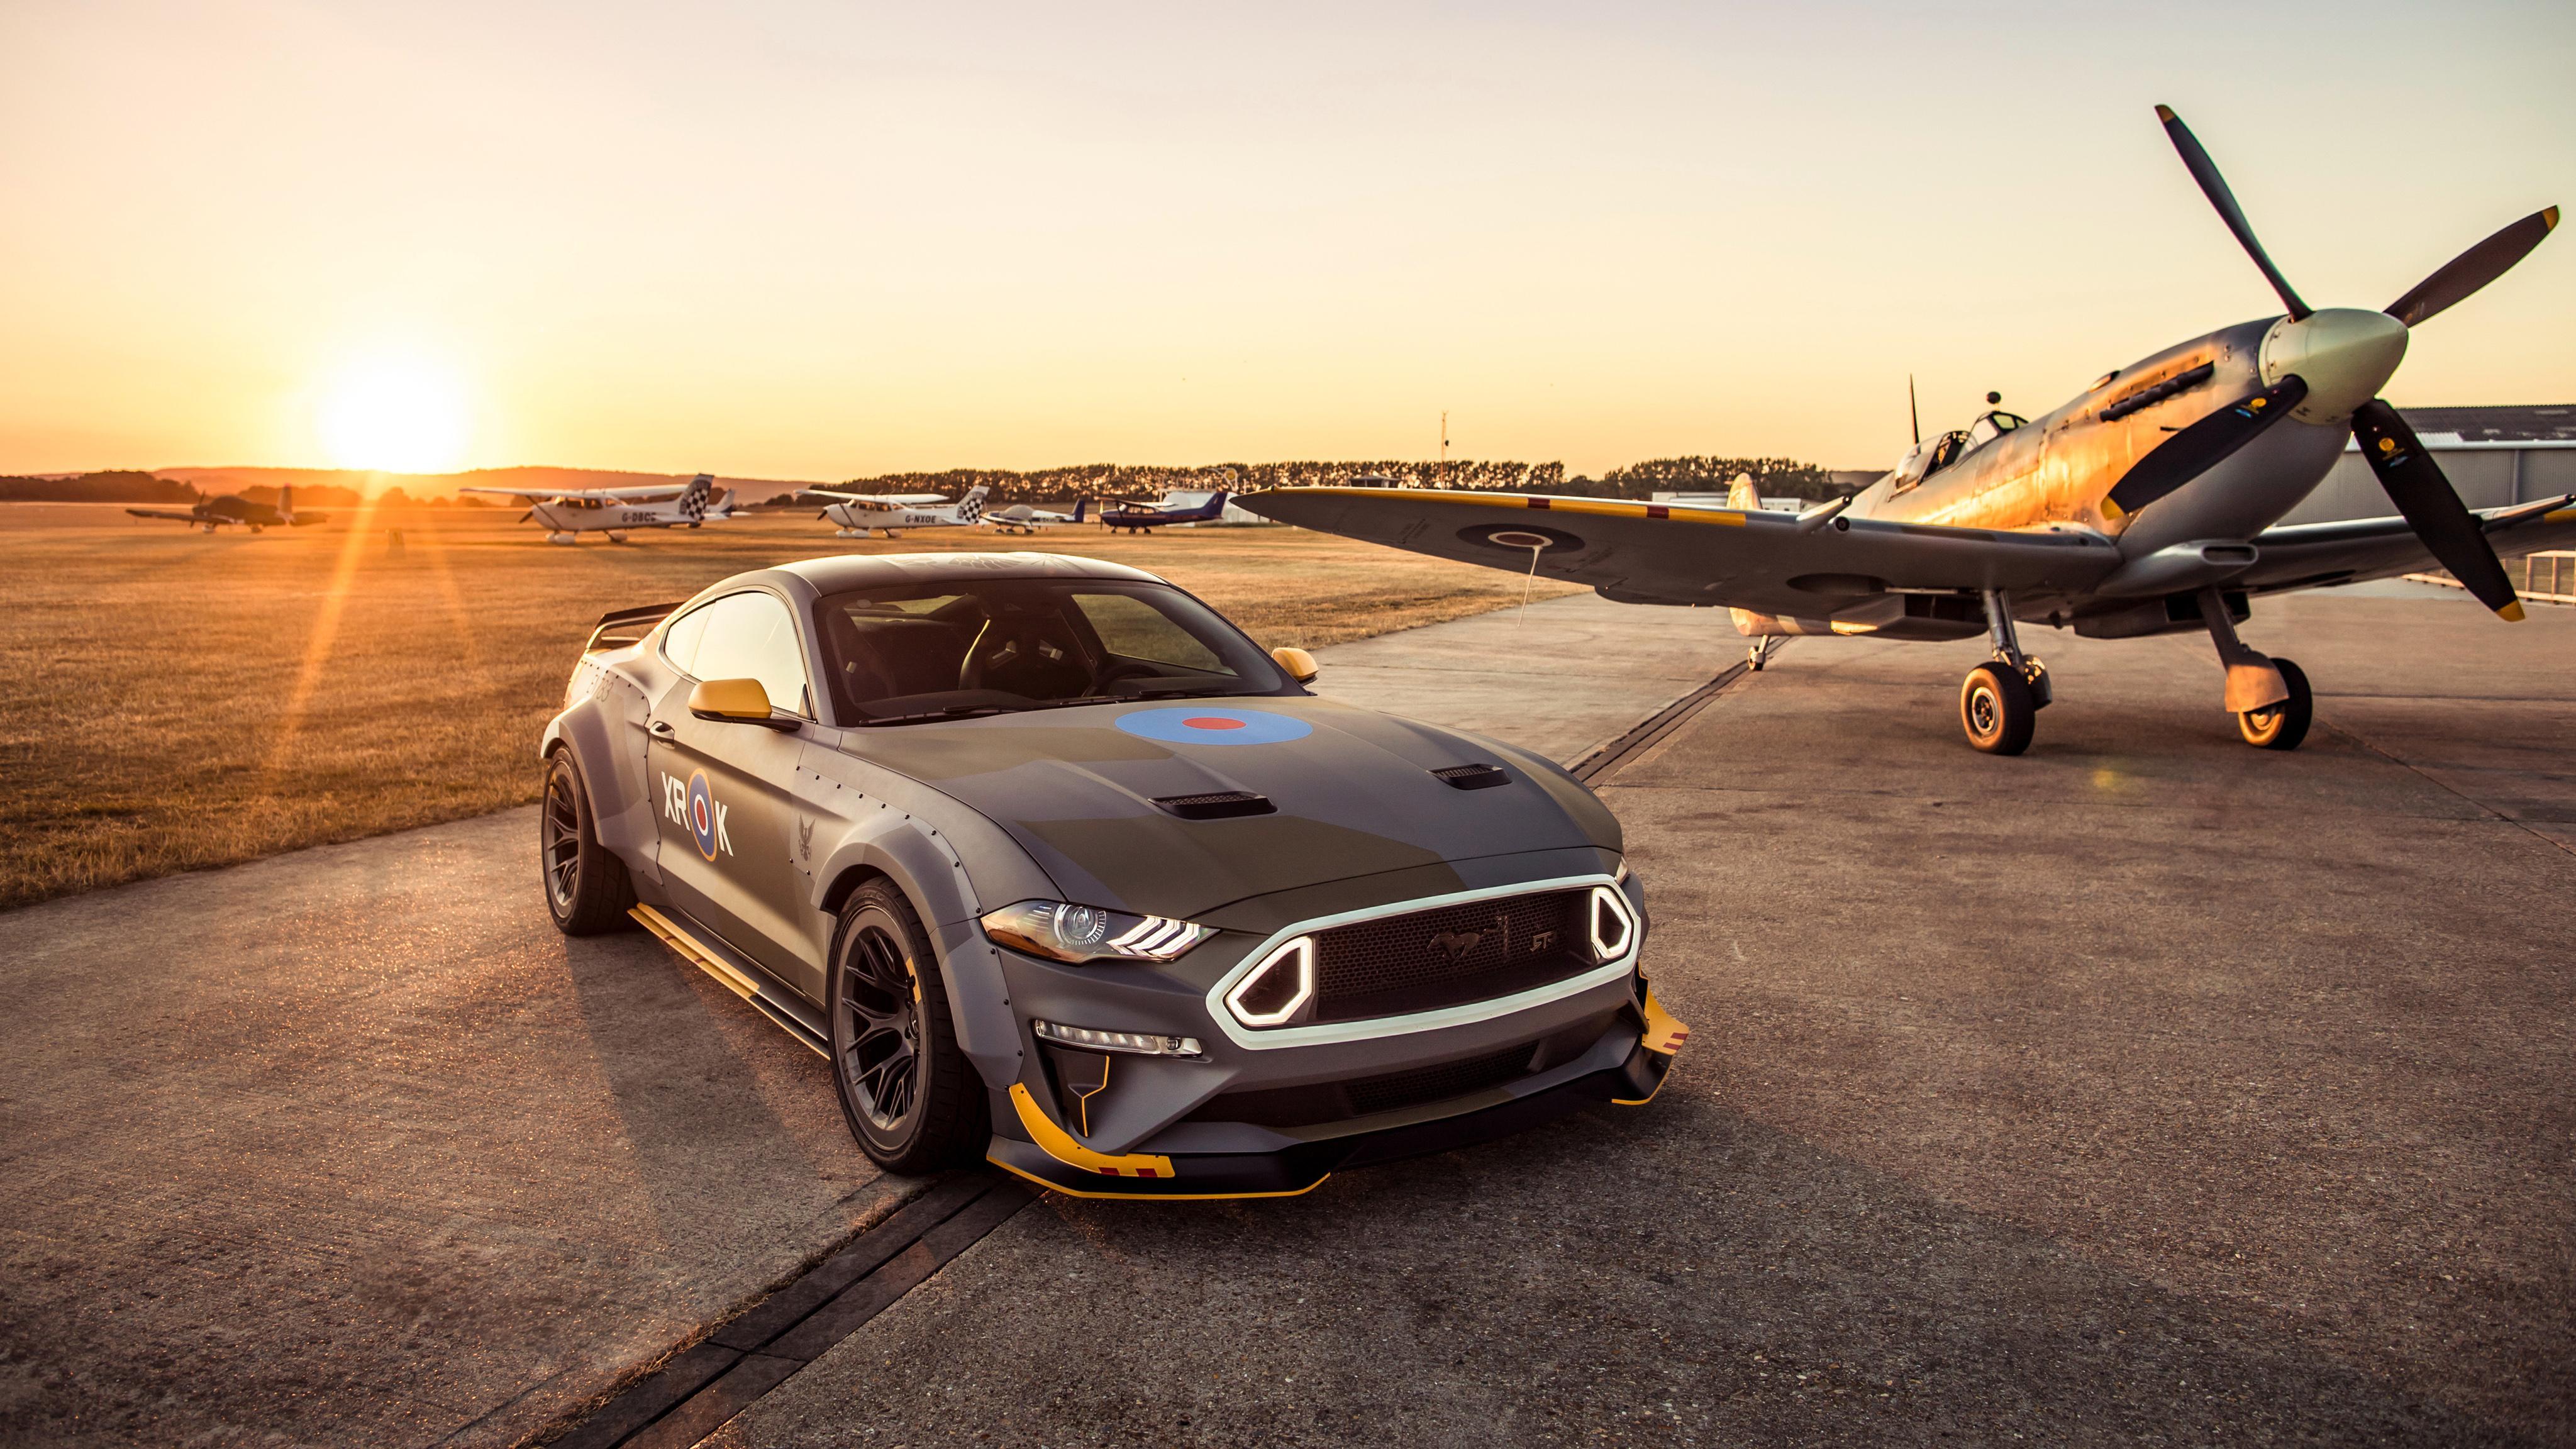 Ford Eagle Squadron Mustang GT 2018 4K Wallpapers